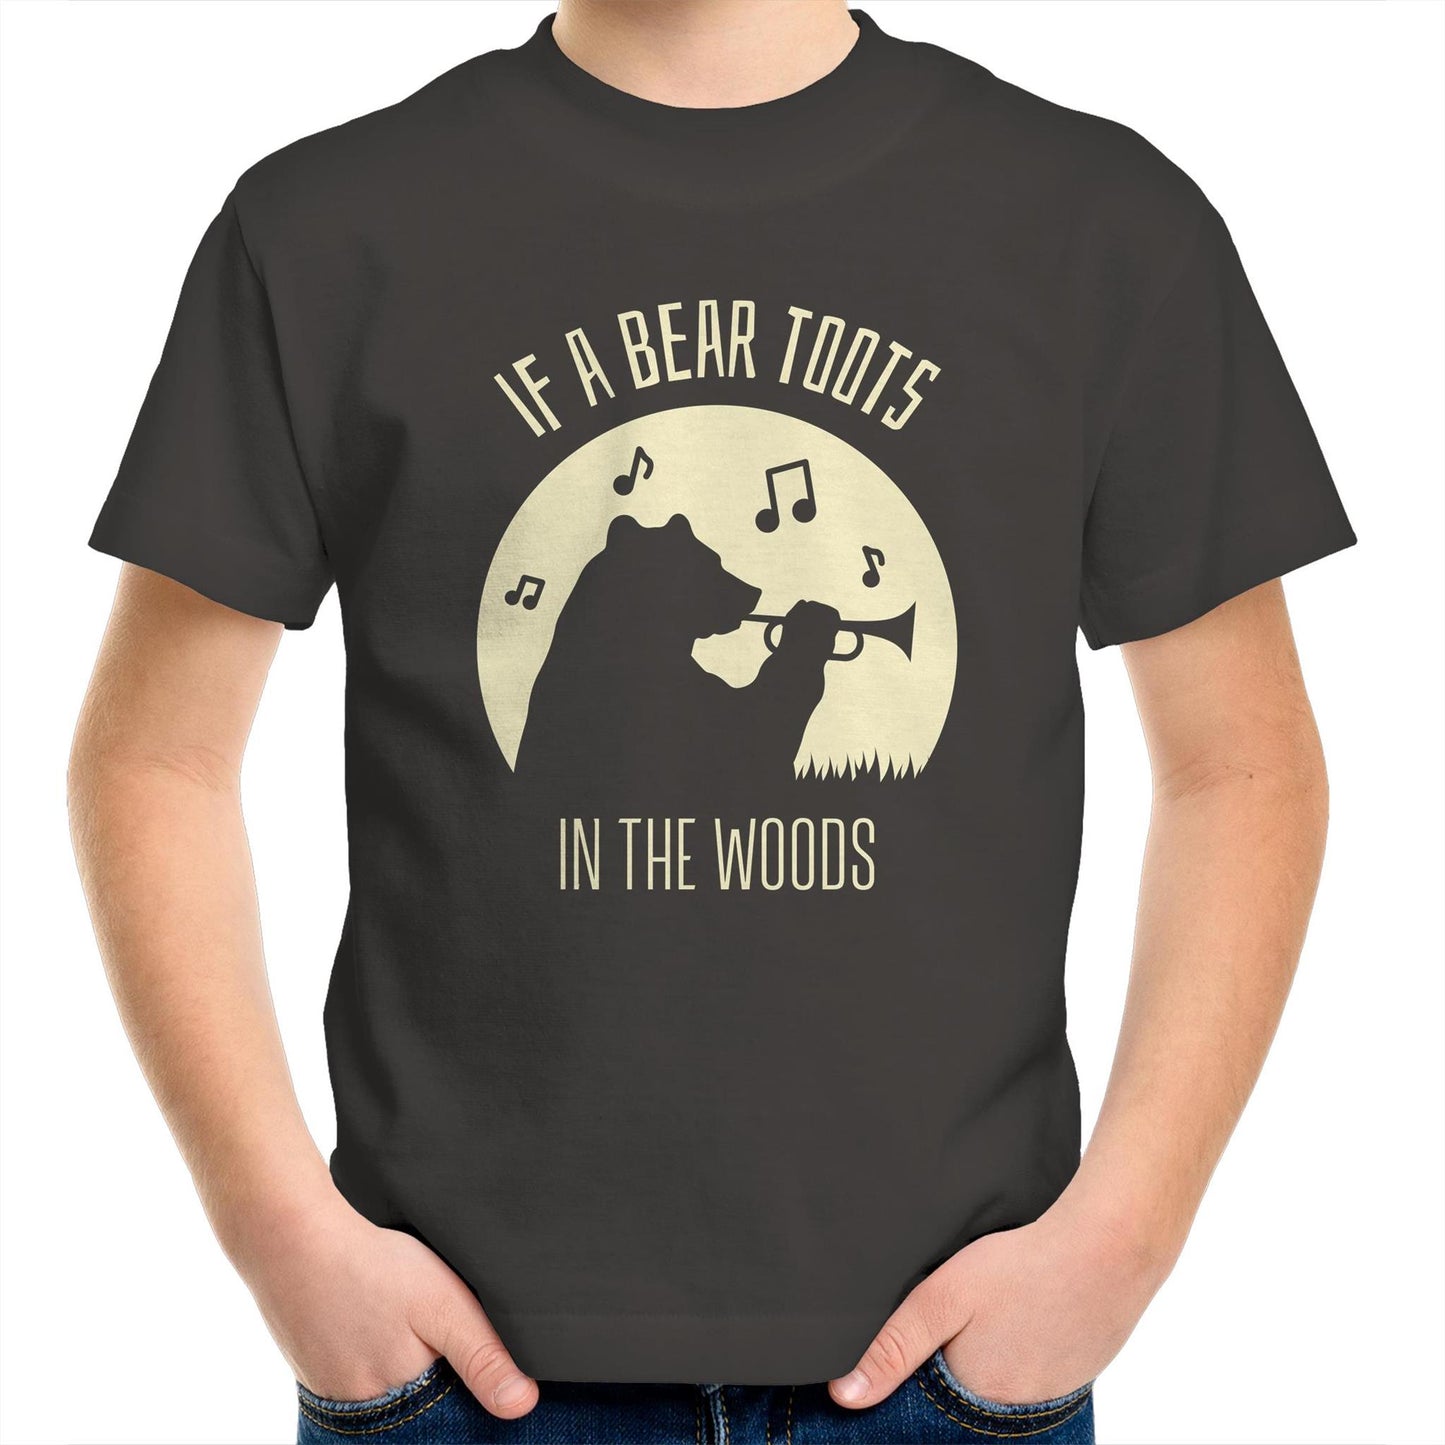 If A Bear Toots In The Woods, Trumpet Player - Kids Youth T-Shirt Charcoal Kids Youth T-shirt animal Music